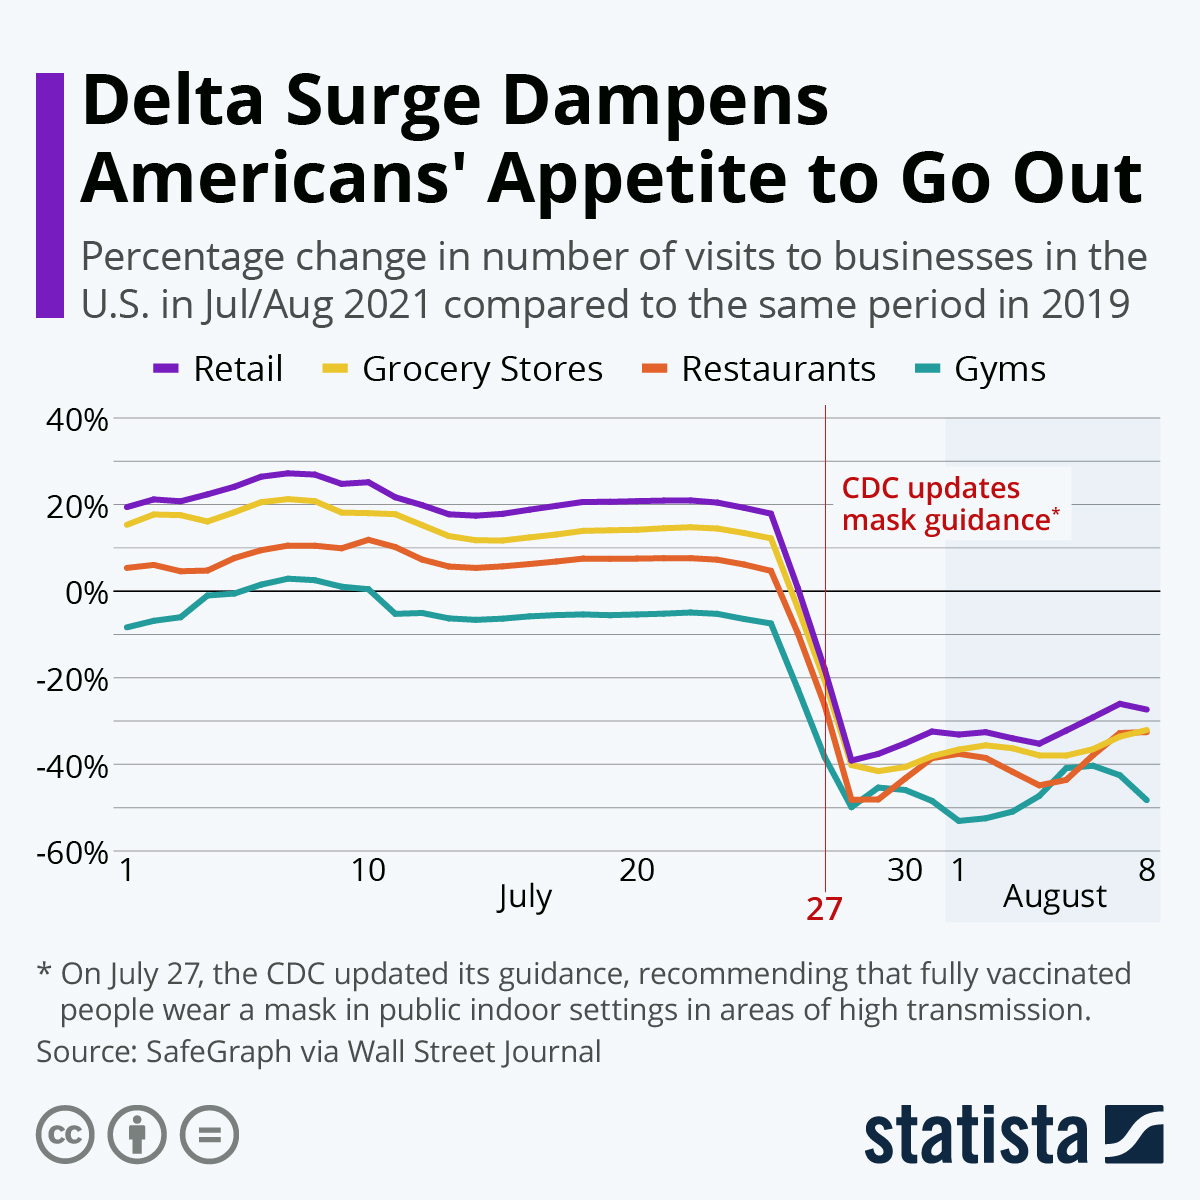 Delta Surge Dampens Americans' Appetite to Go Out